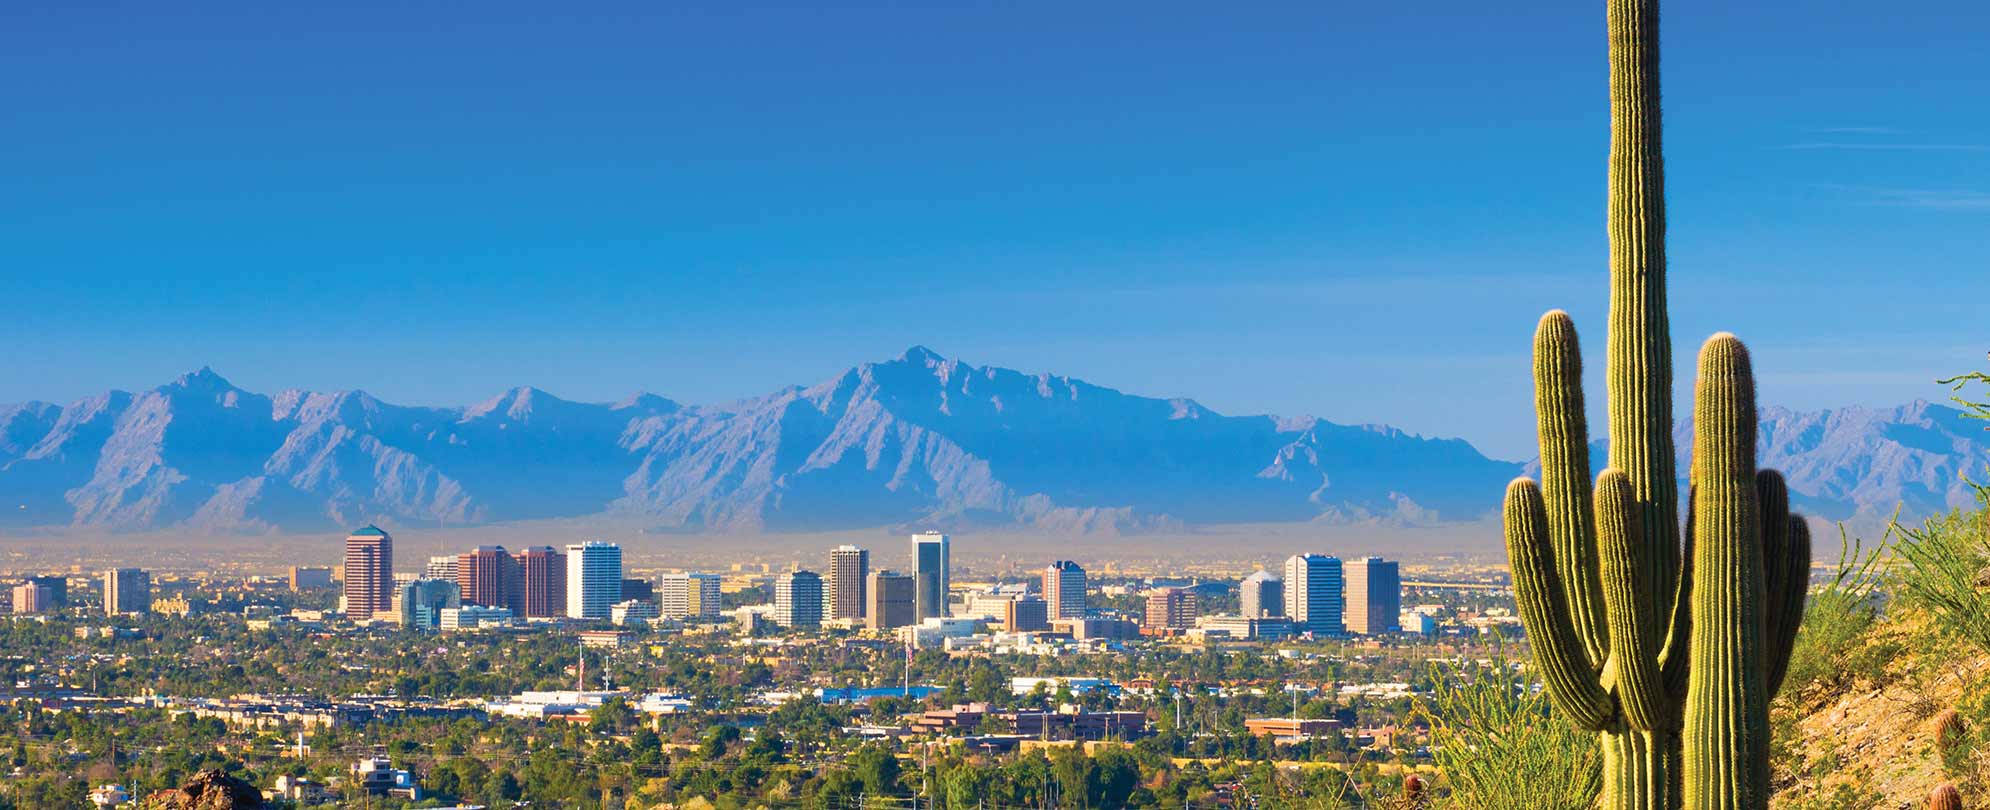 A view of the city and mountains of Phoenix, Arizona from the desert.